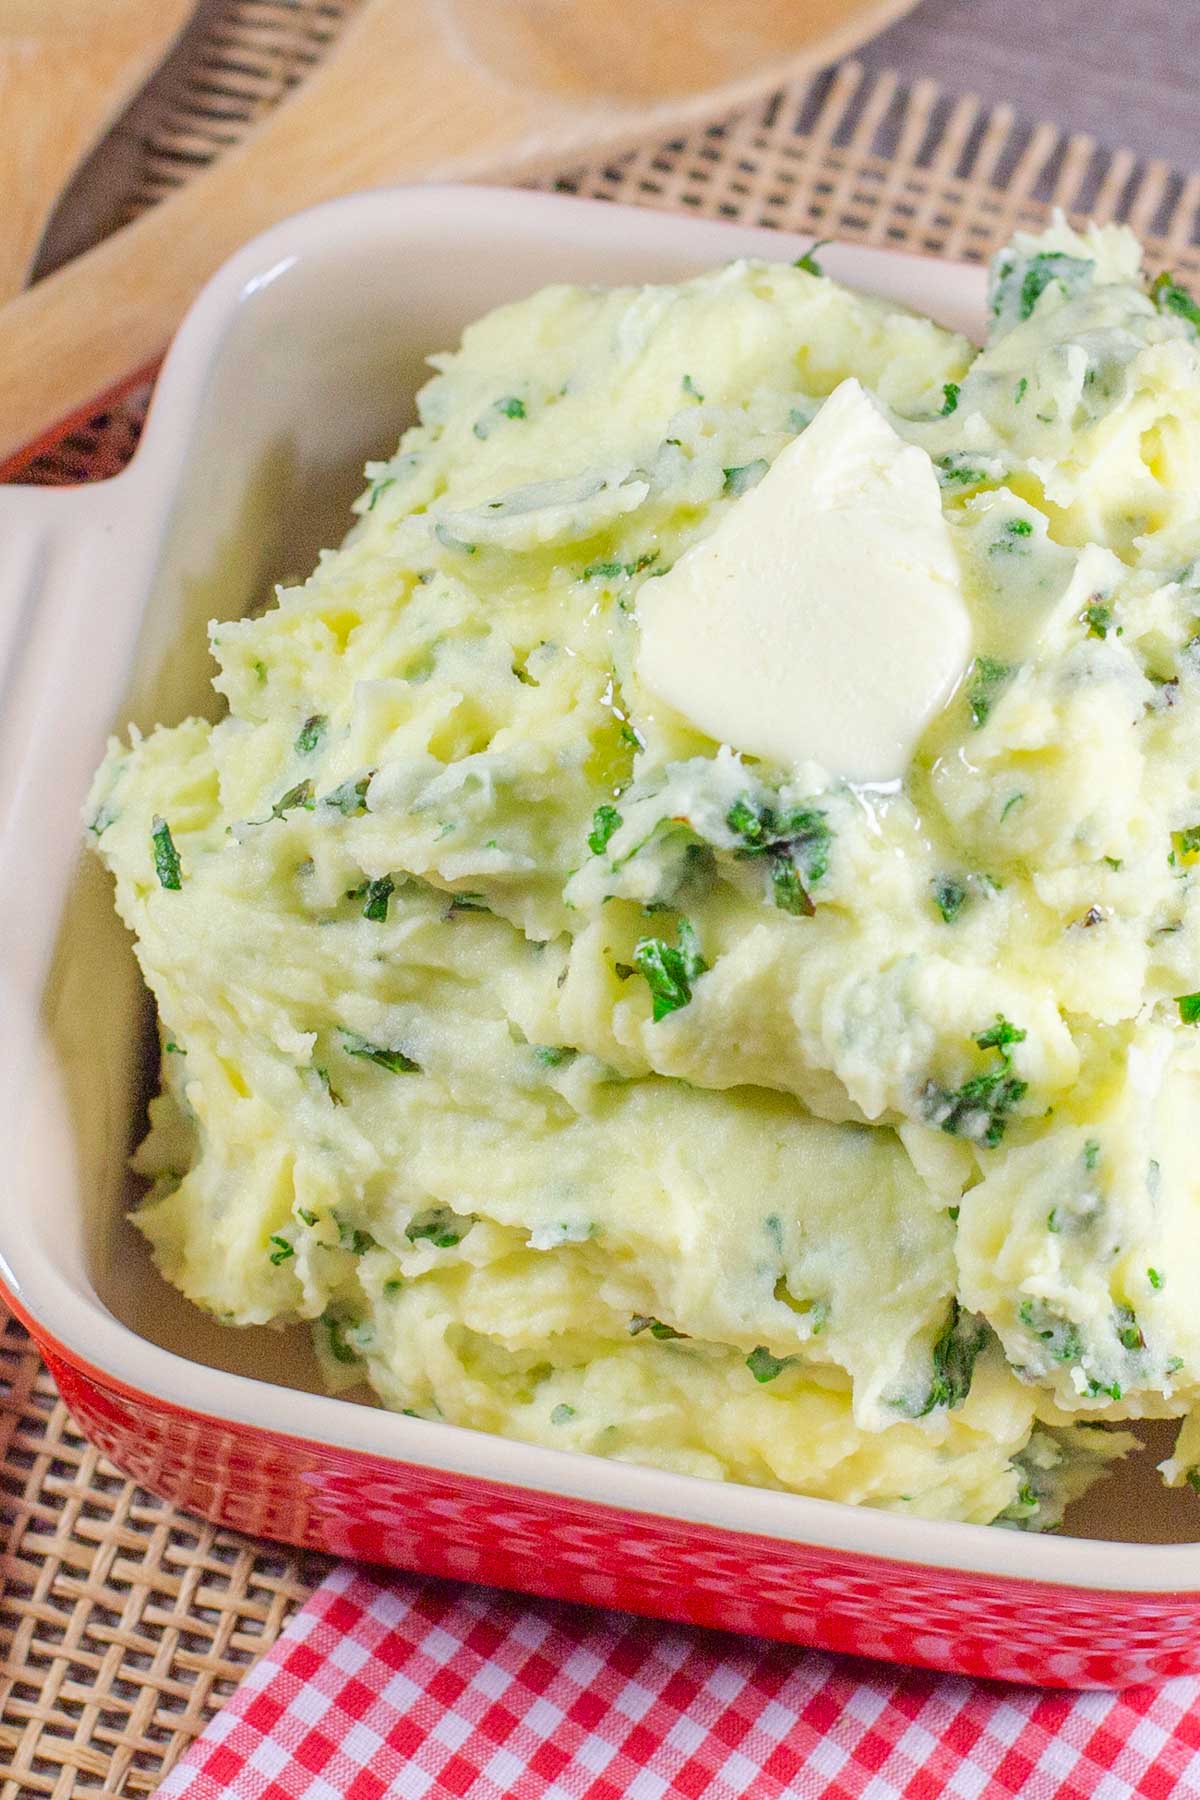 Mashed potatoes with kale topped with pat of butter.